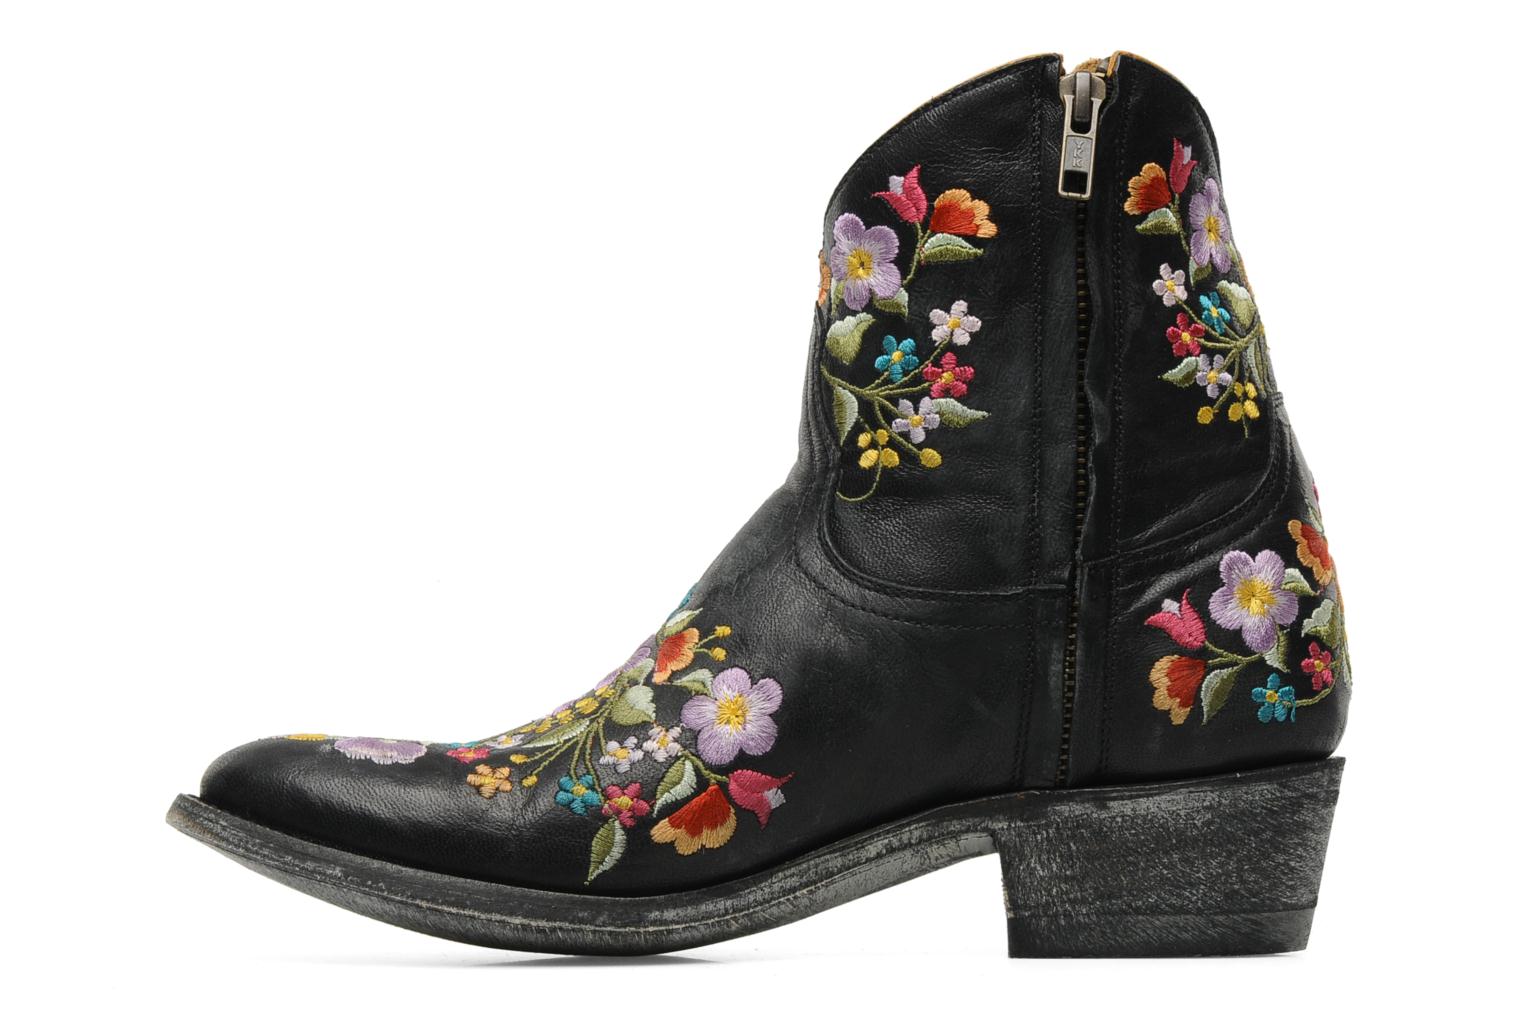 Mexicana Tijuana Ankle boots in Black at Sarenza.co.uk (137534)